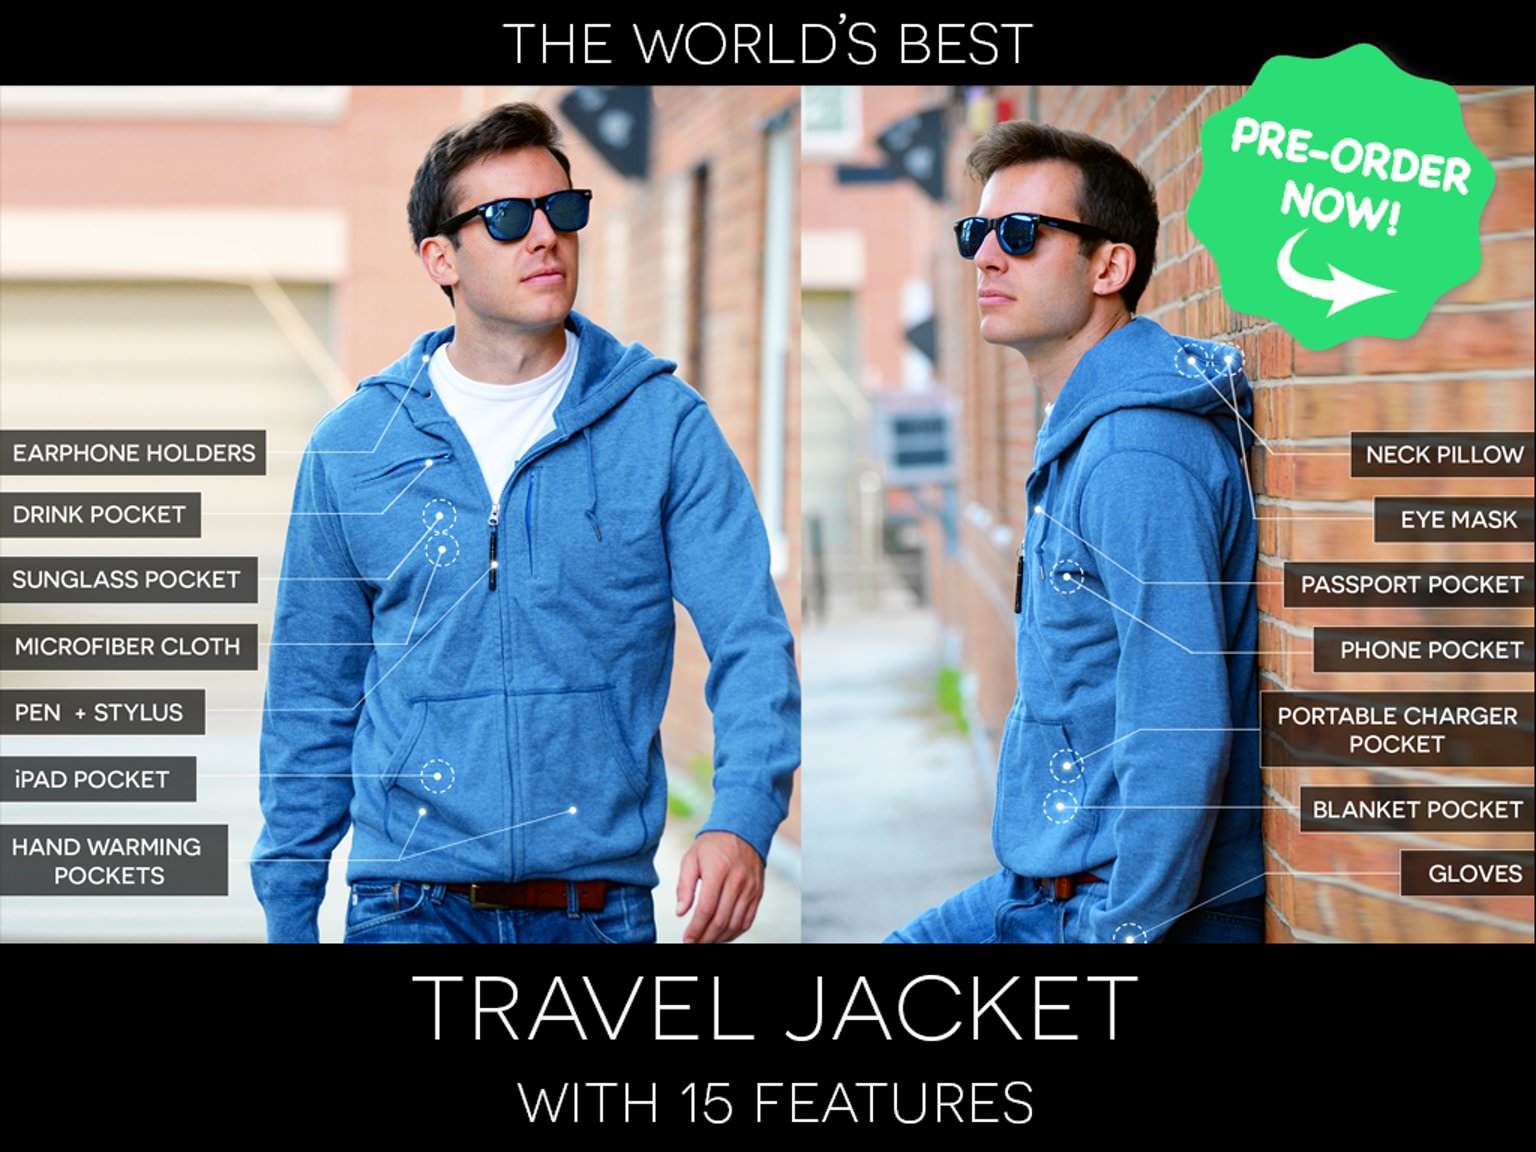 Forget Your Smartphone, This Jacket Is the Greatest Gadget You Can Buy